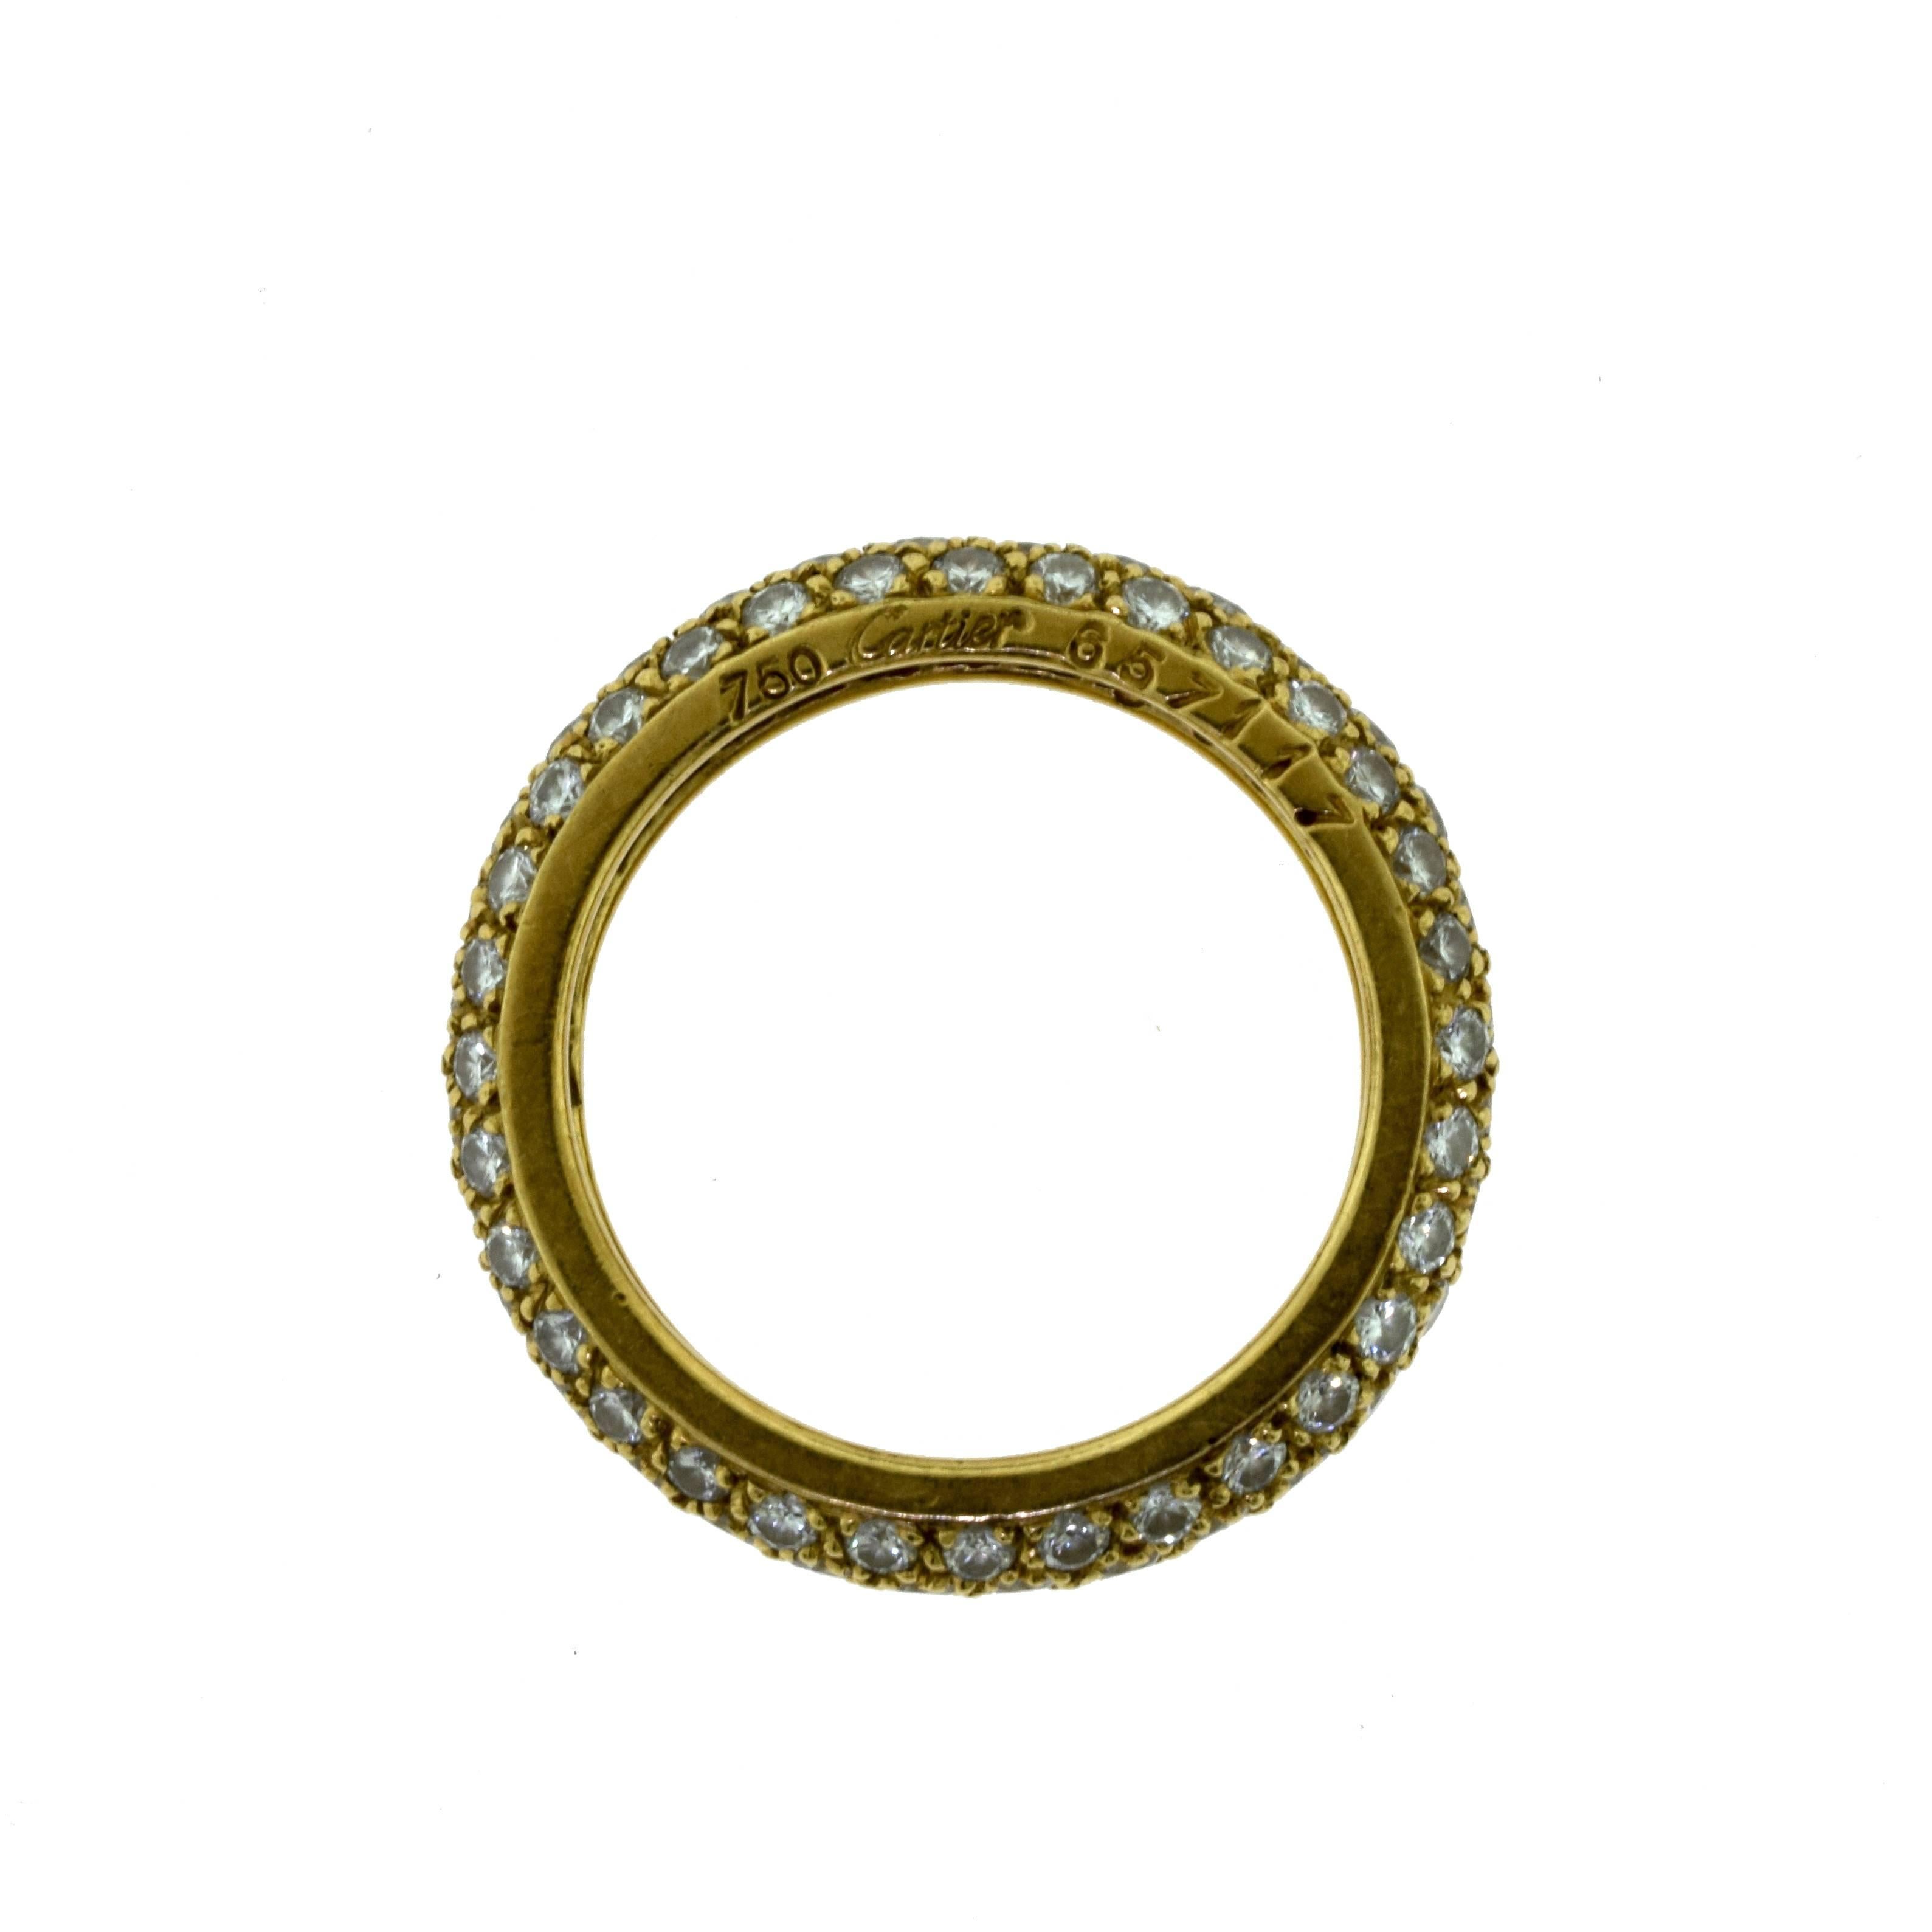 Women's or Men's Vintage Cartier Pave Diamond Eternity Ring in 18 Karat Yellow Gold For Sale